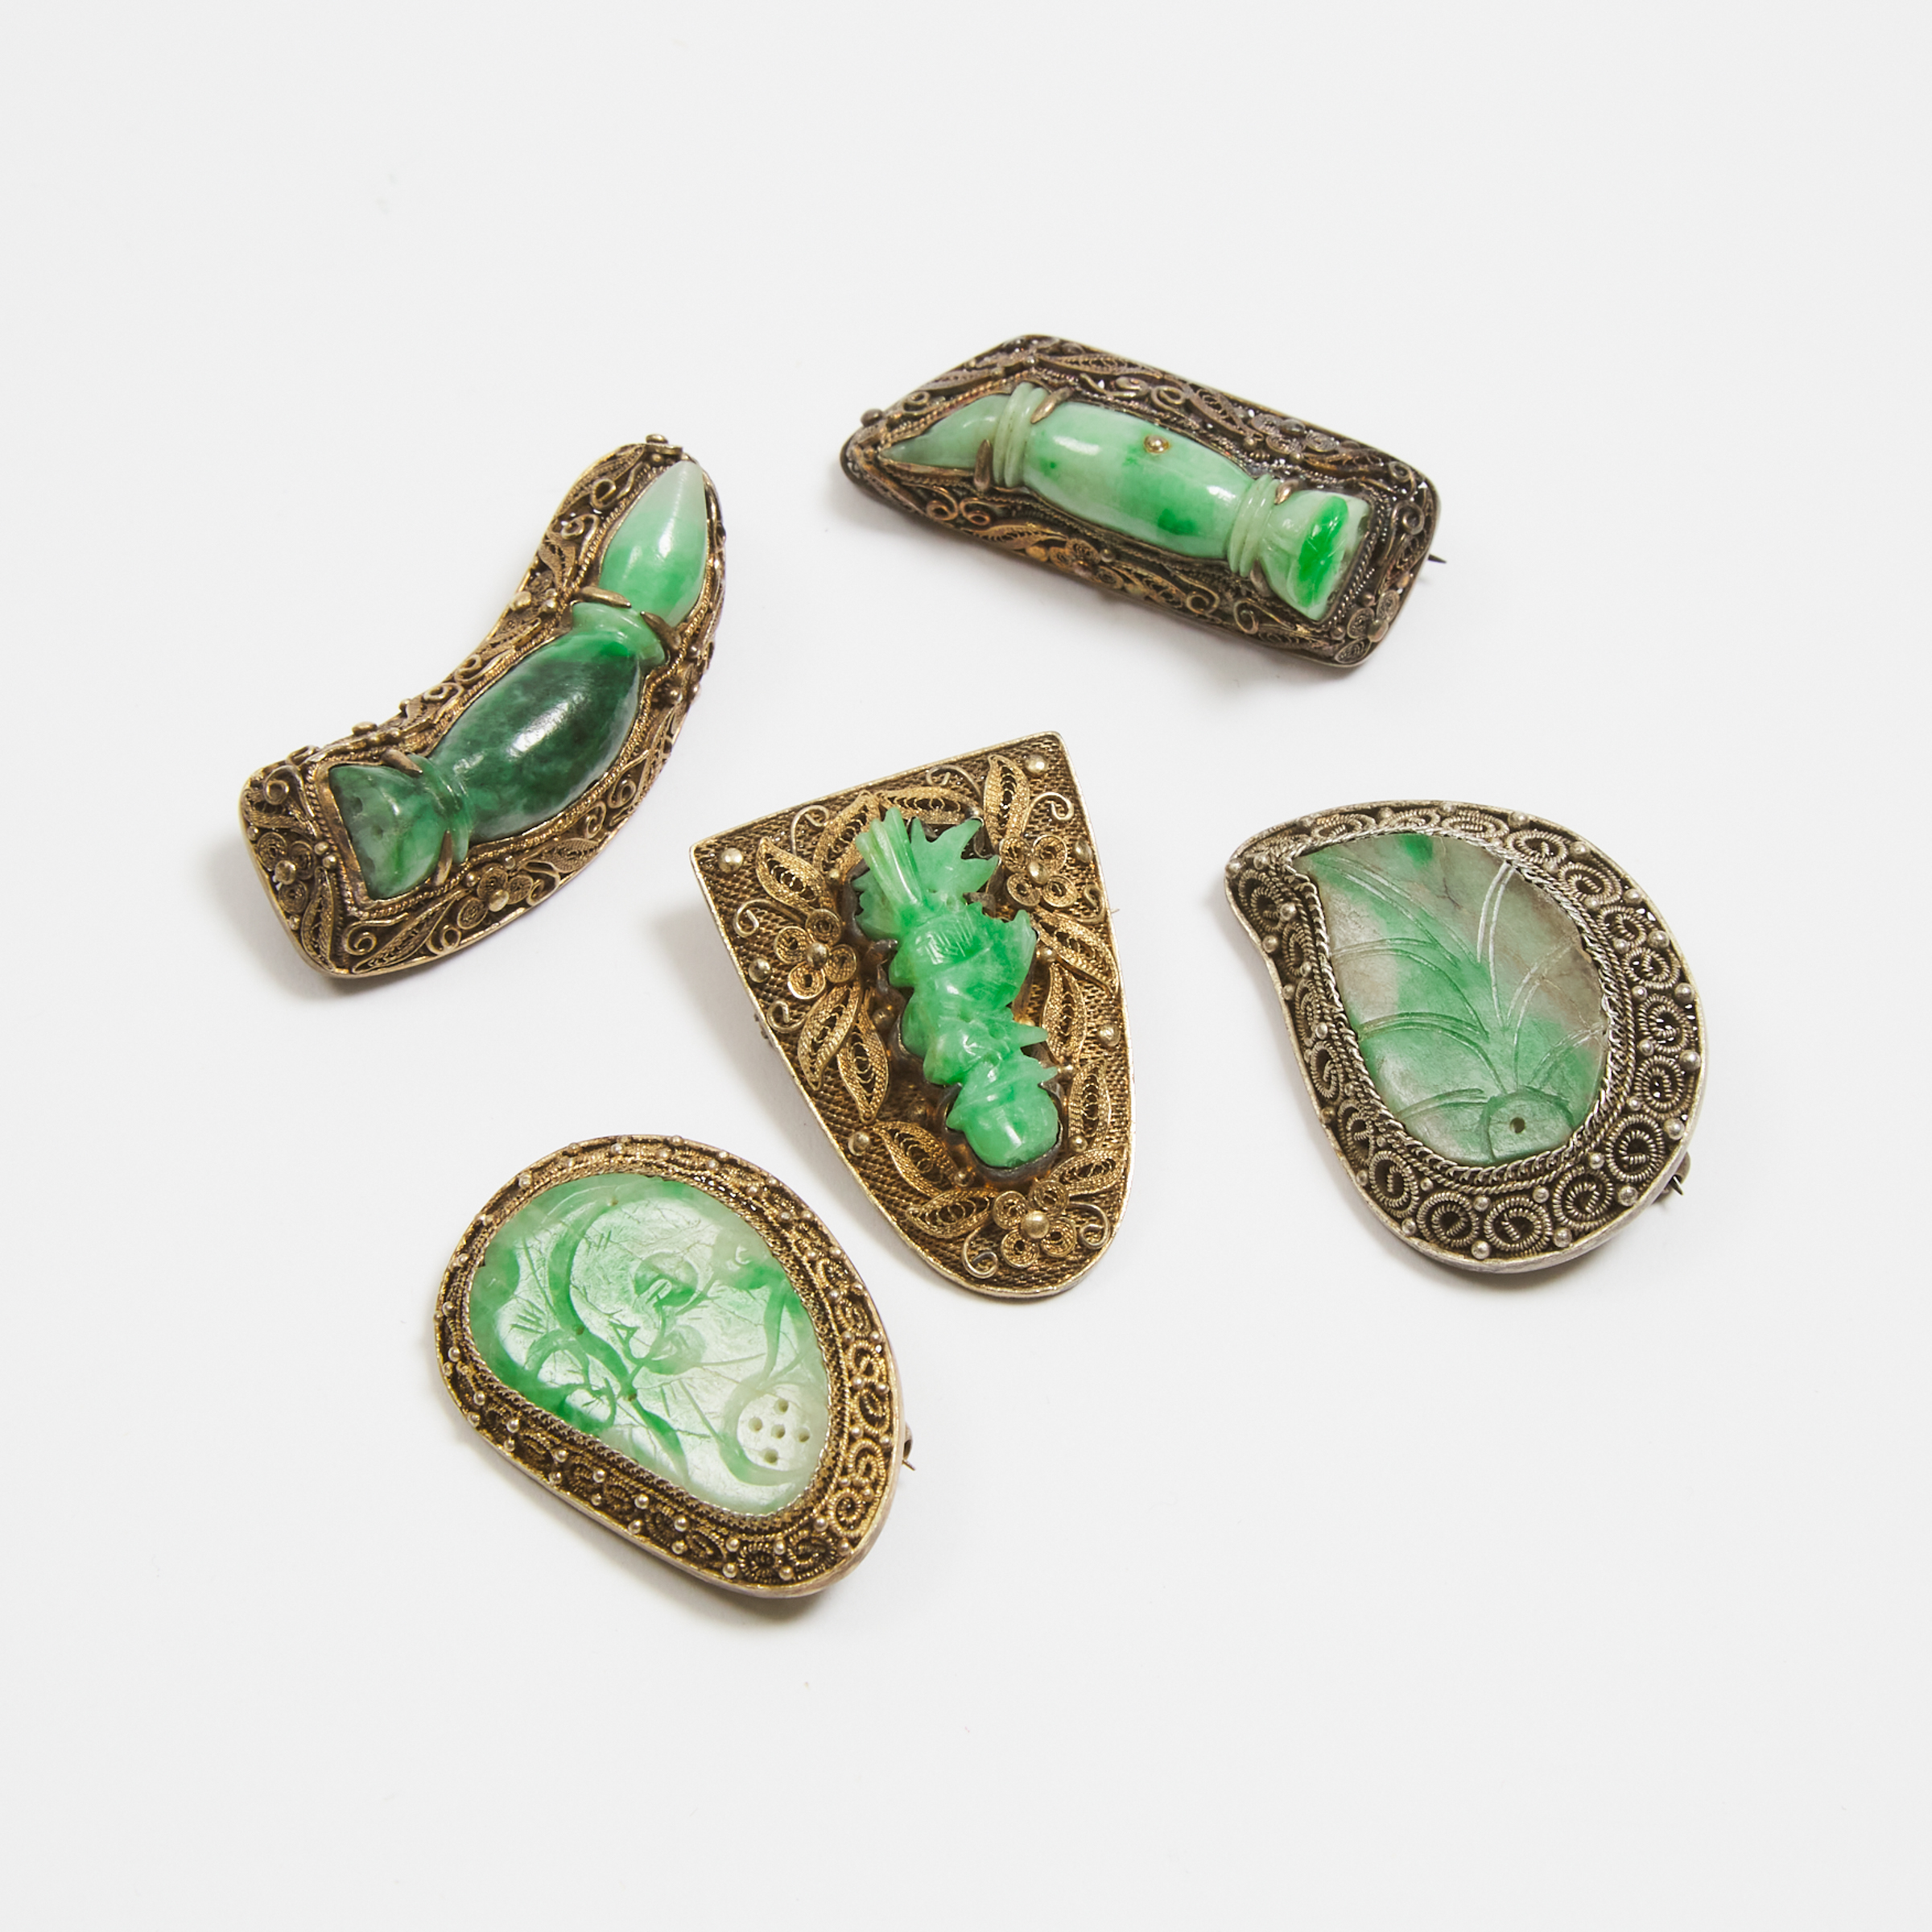 A Group of Five Chinese Silver-Gilt Filigree Brooches with Carved Jadeite Inlays, 19th/20th Century  